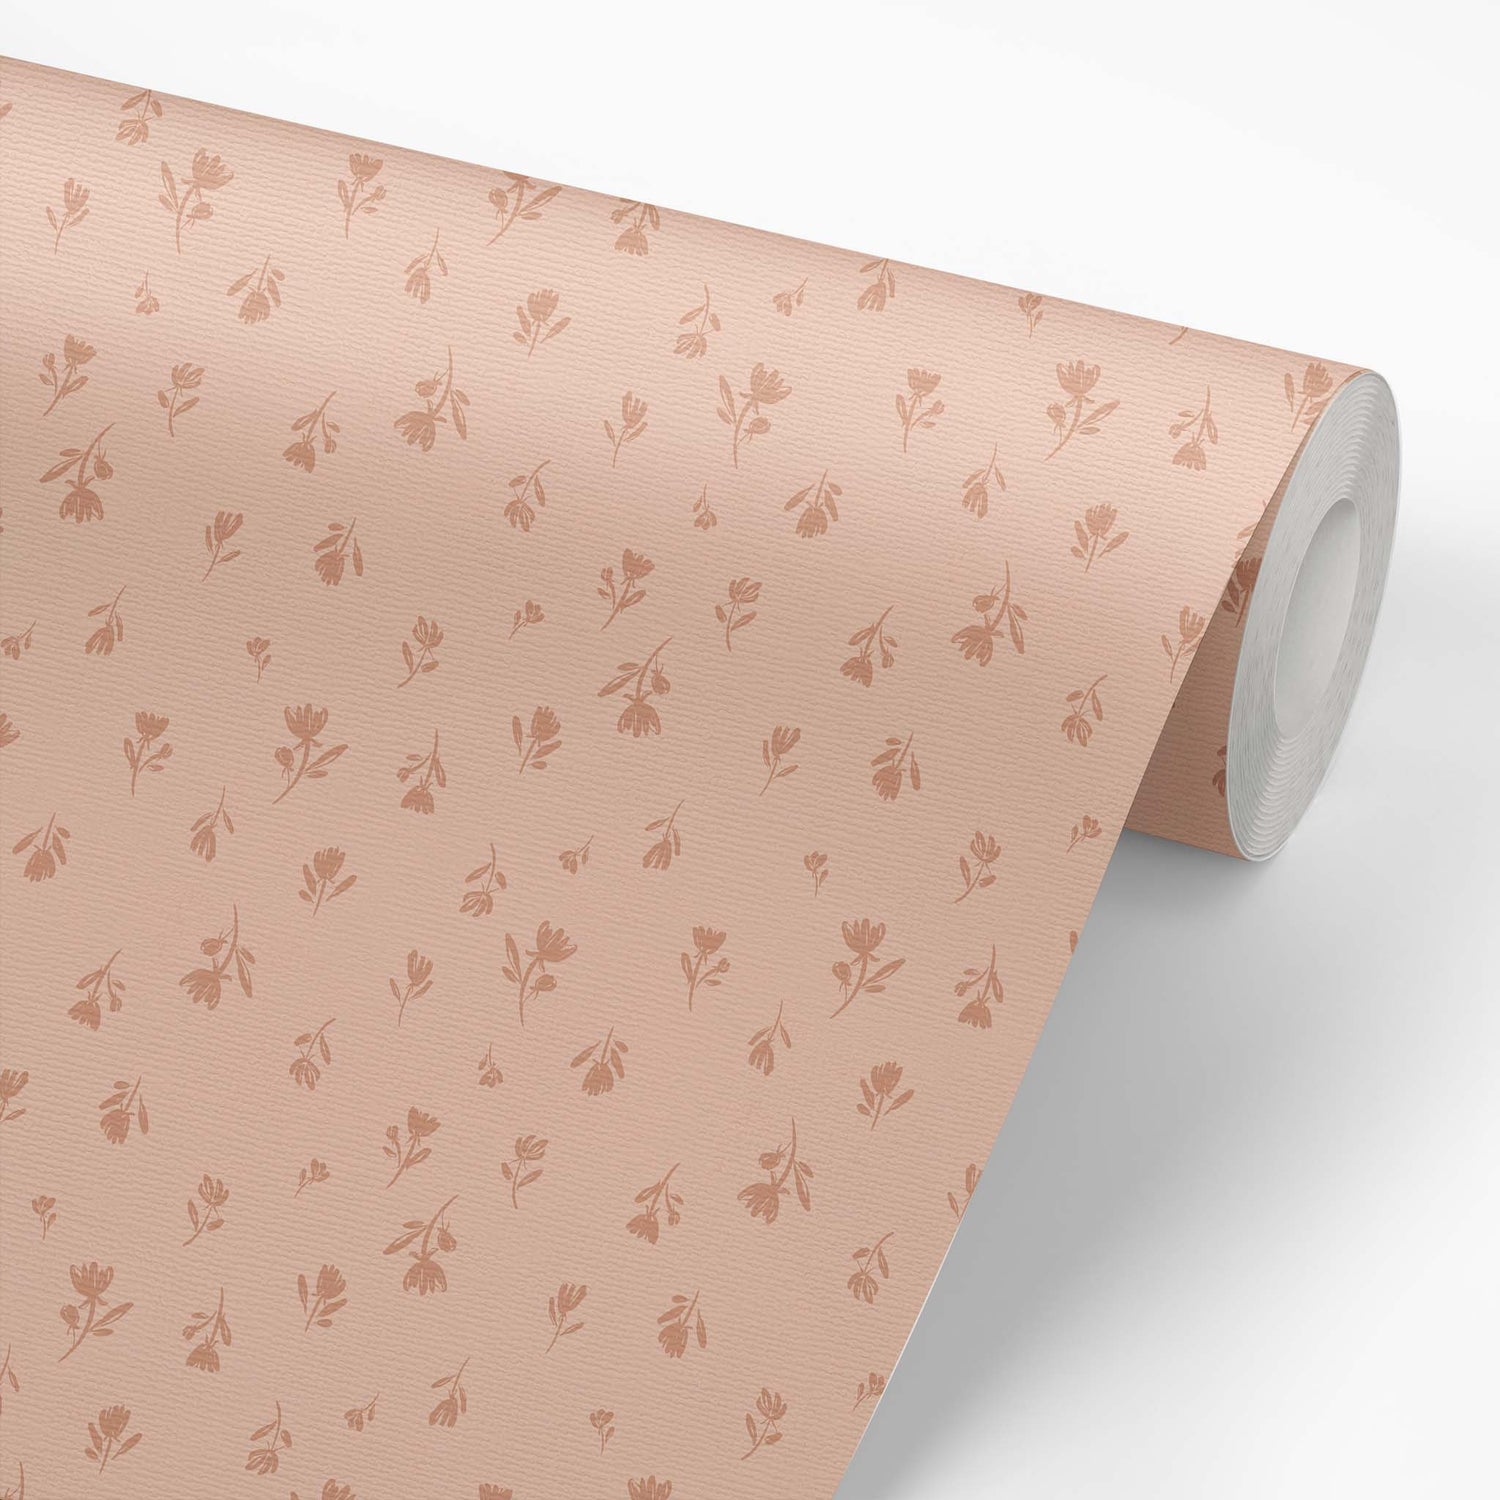 Wallpaper panel featuring Cayla Naylor Annette-Blush Peel and Stick Wallpaper - a floral pattern